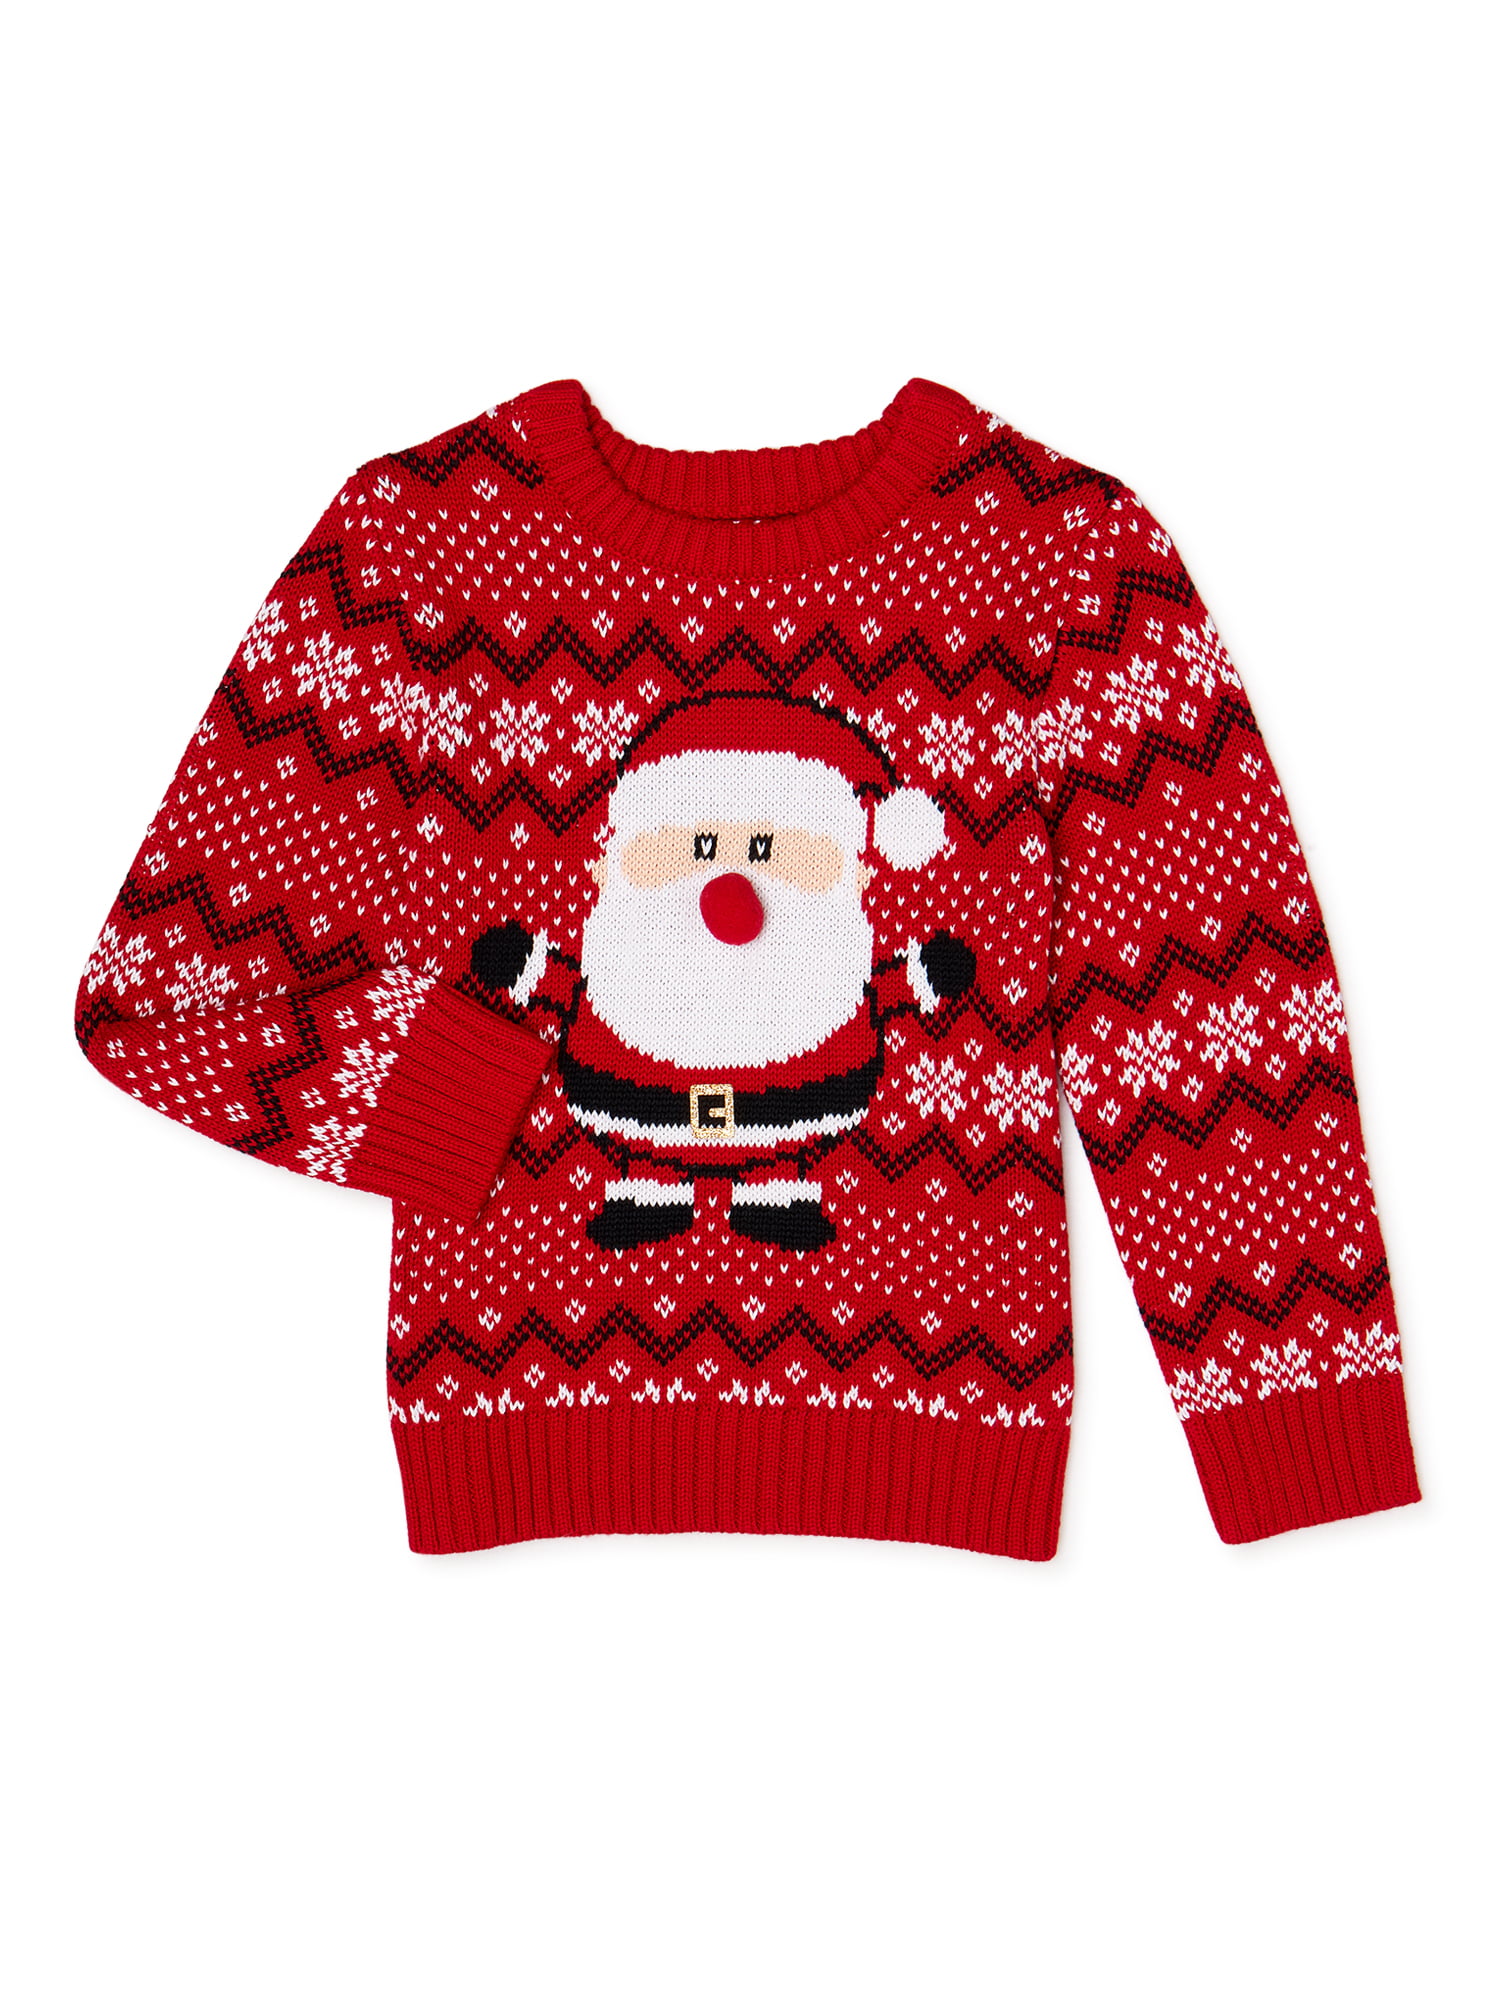 Starting Out Baby Boys' 3 pc Christmas Outfit sweater Santa train Truck moose 